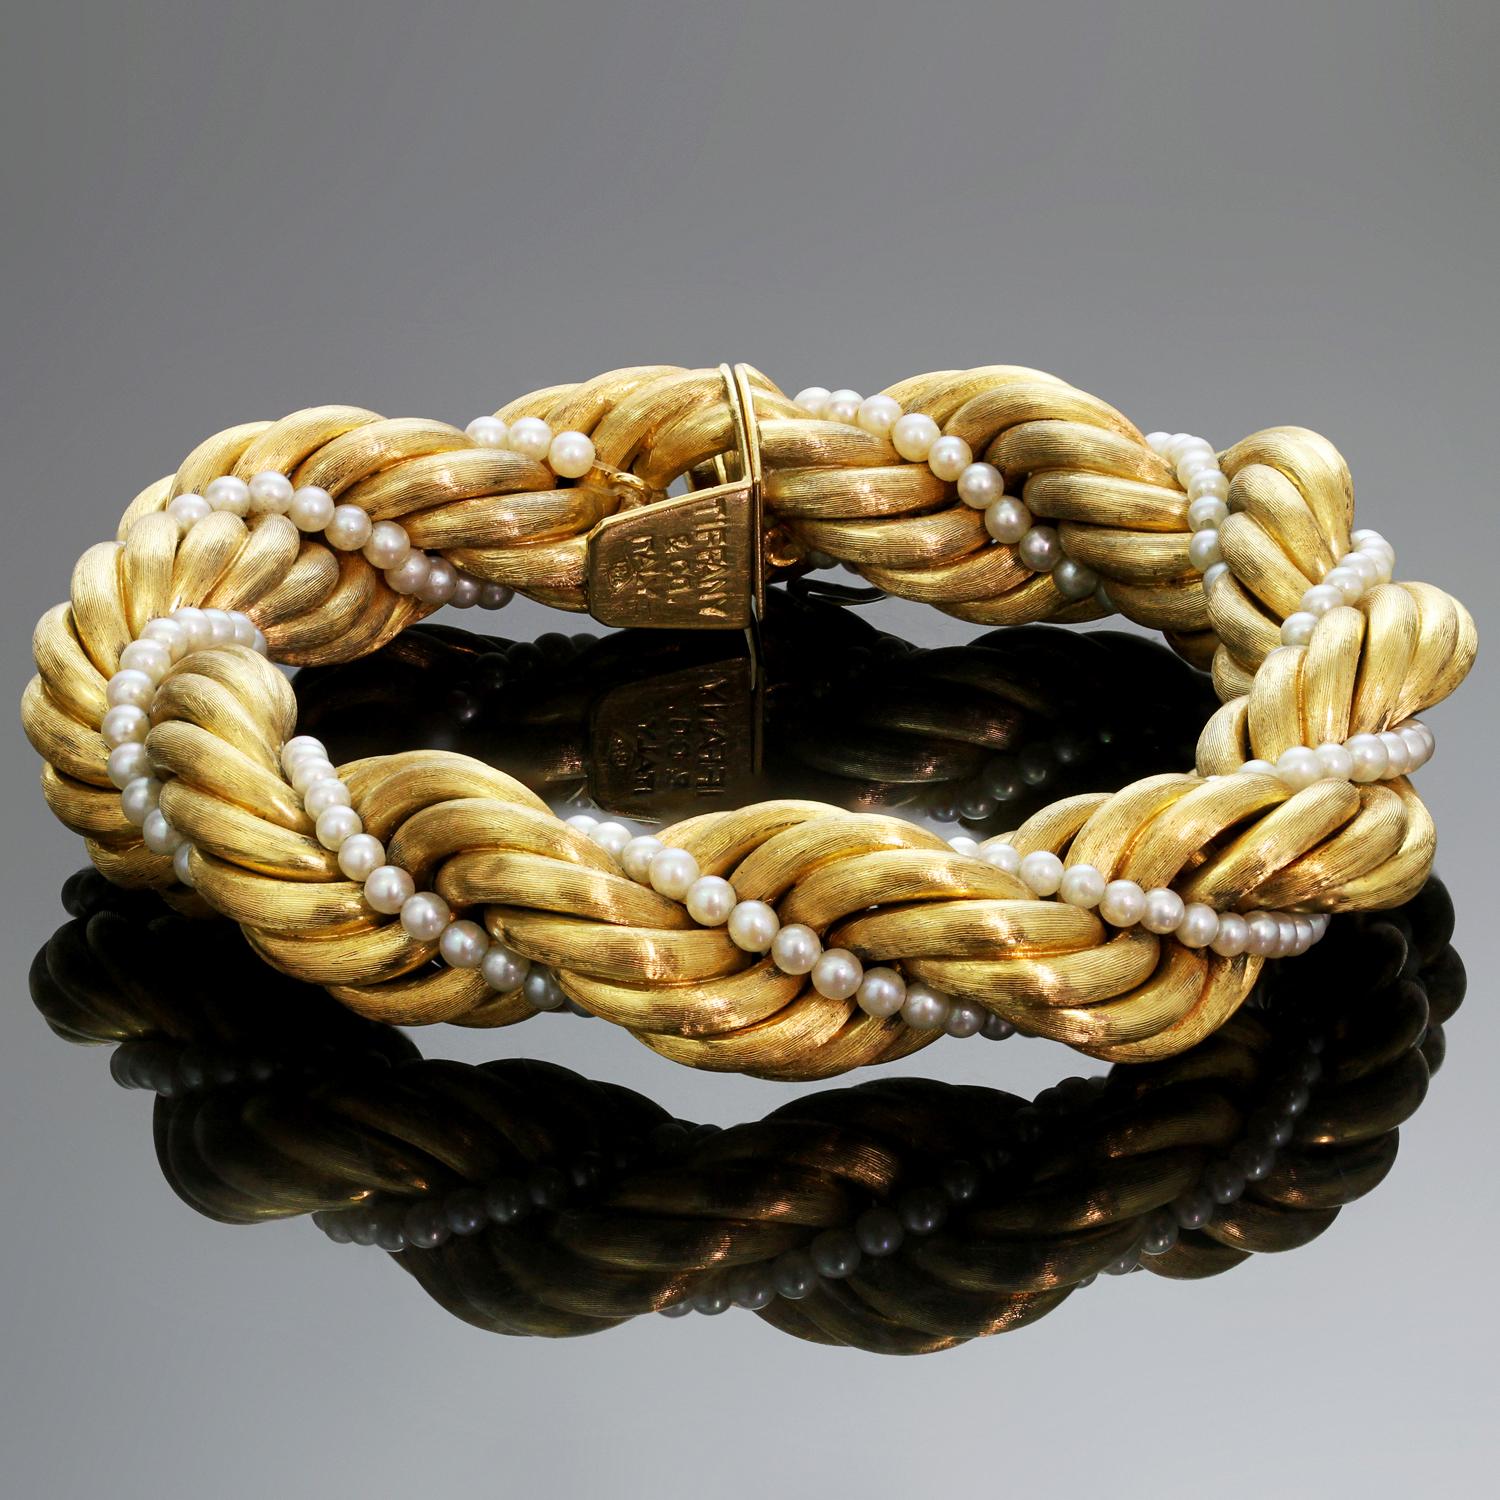 This exquisite vintage Tiffany bracelet features a gorgeous twisted rope design crafted in 18k brushed yellow gold and accented with a row of cultured pearls. Made in Italy circa 1960s. Measurements: 0.55